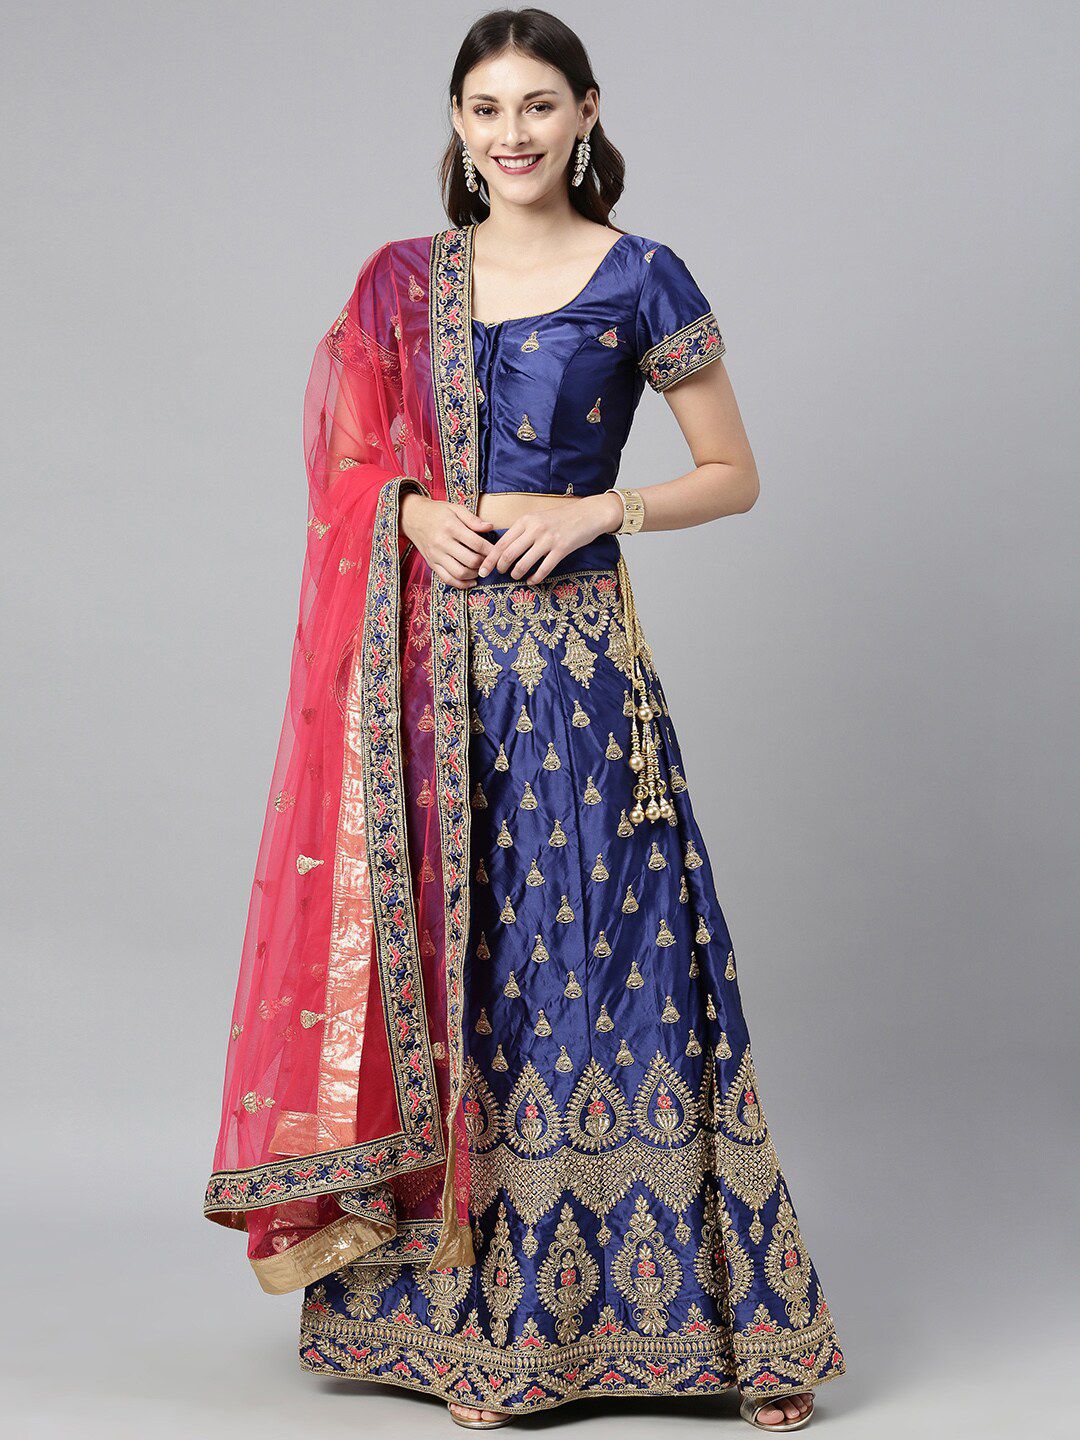 The Chennai Silks Navy Blue & Red Embroidered Ready To Wear Lehenga Choli with Dupatta Price in India